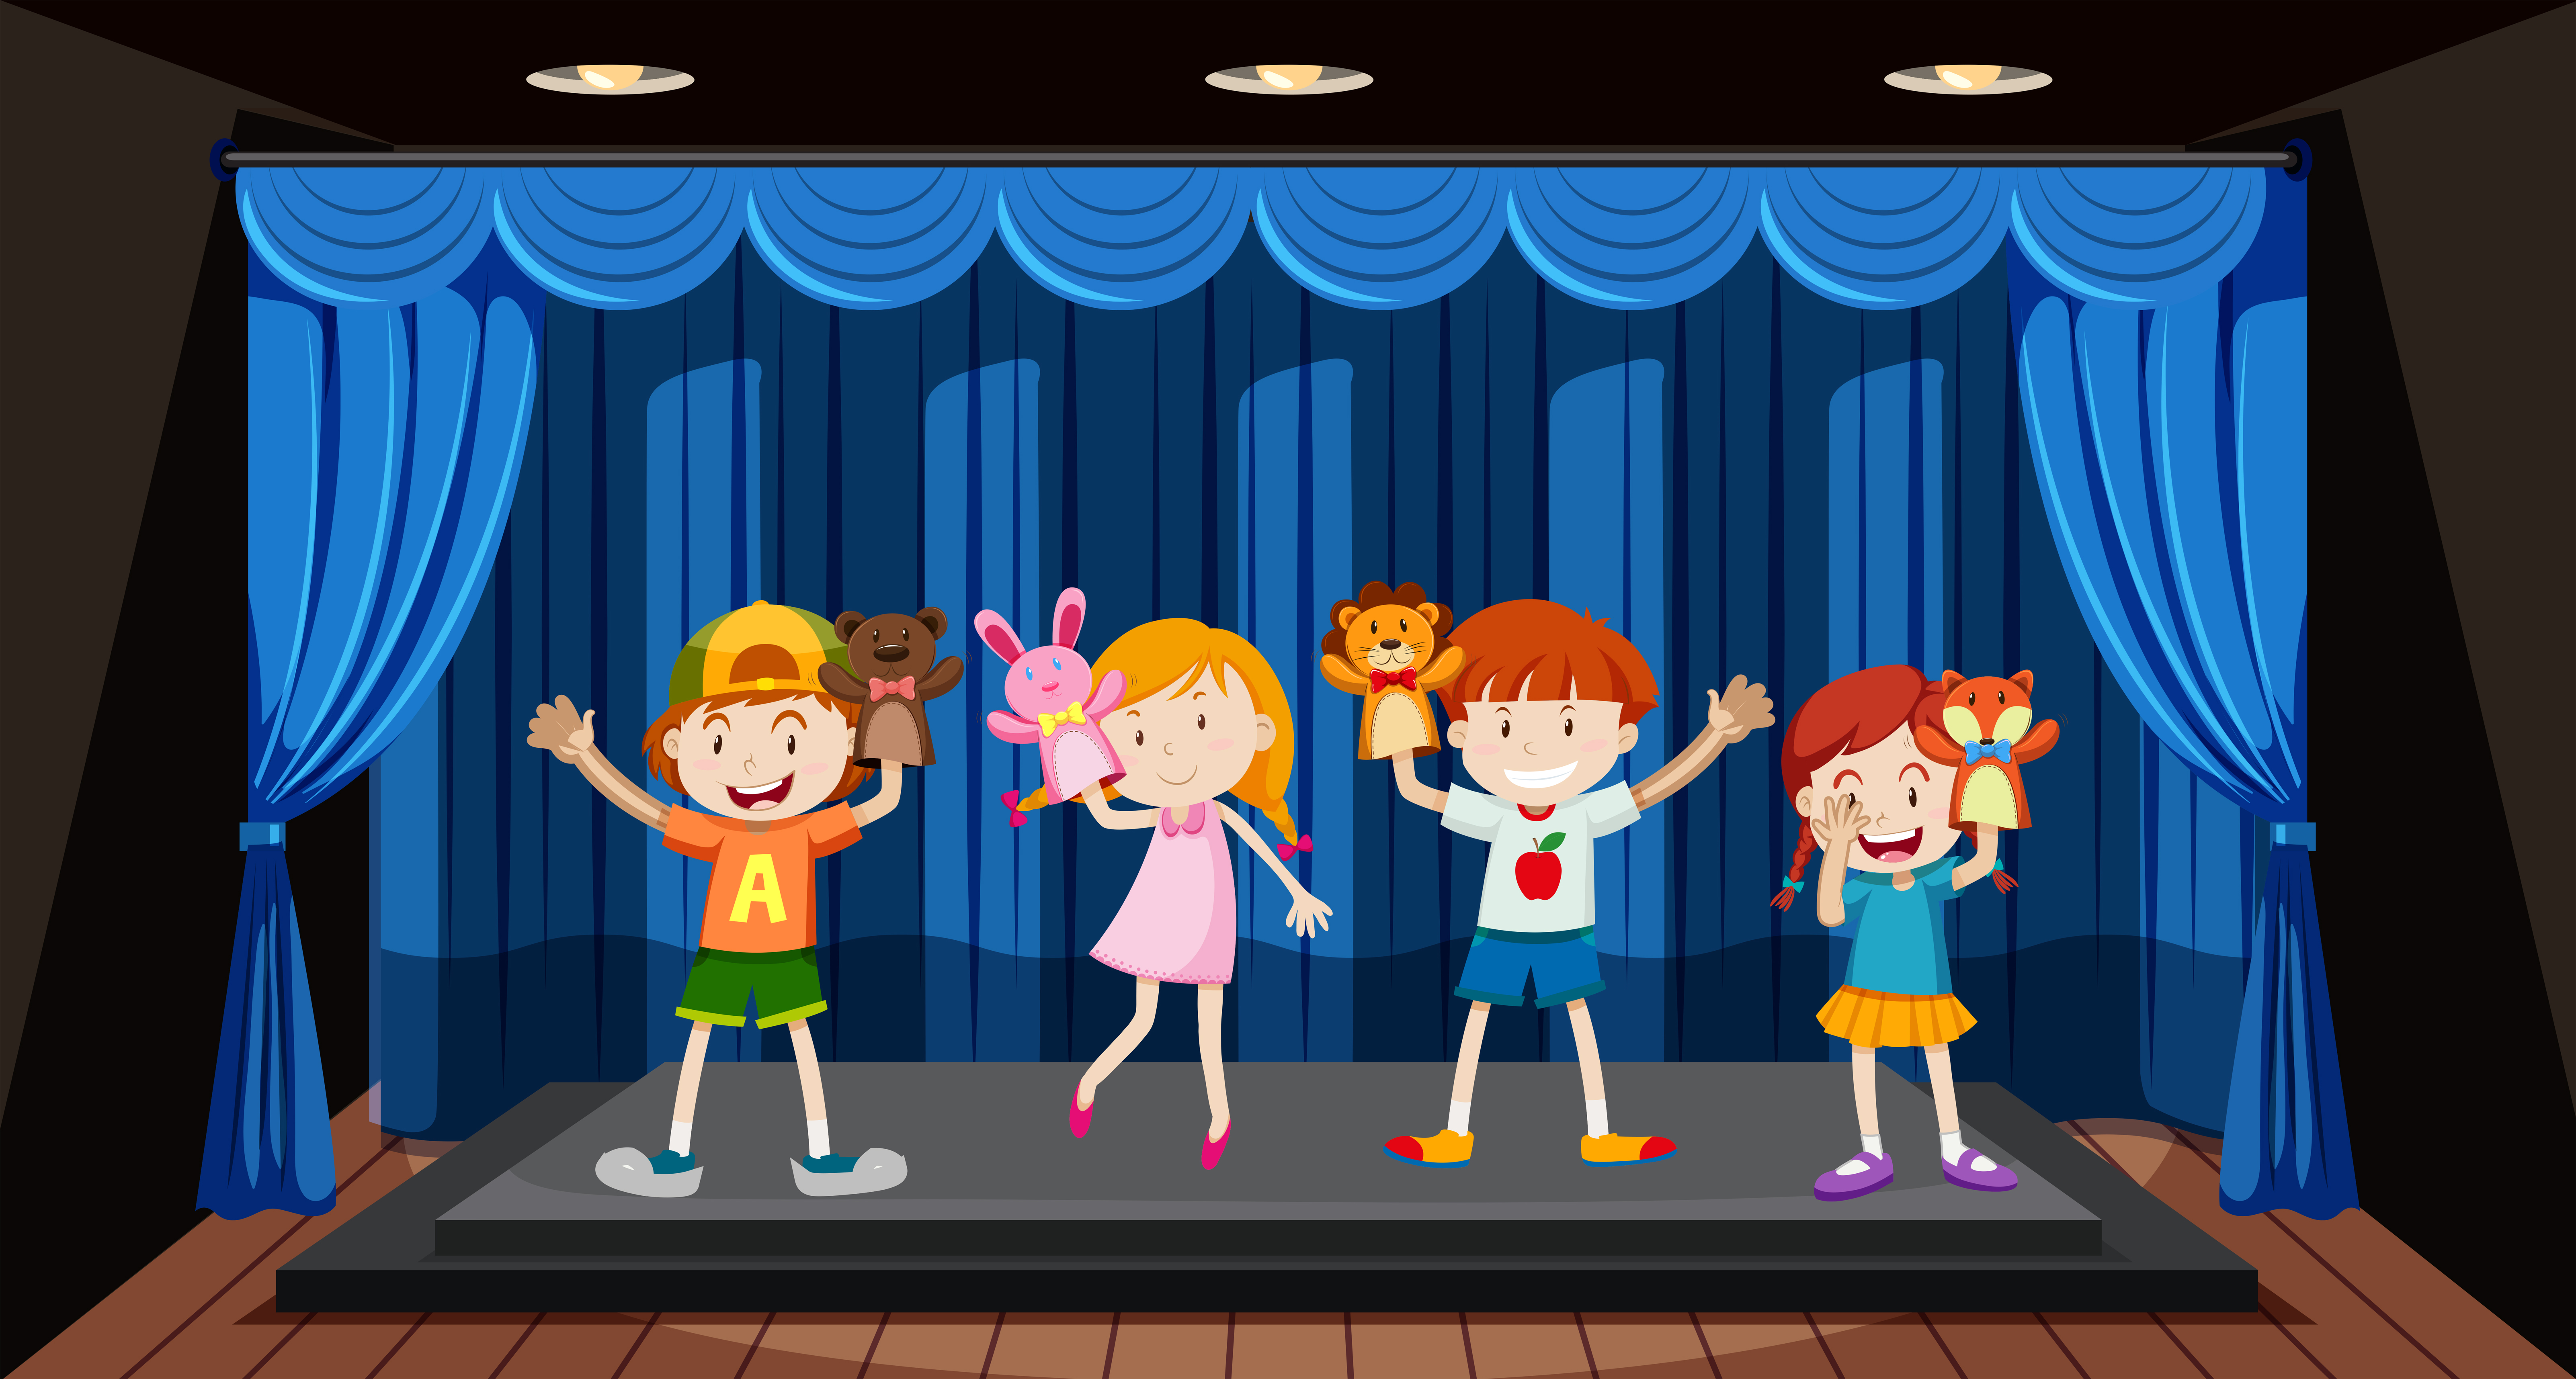 Children play hand puppet on stage 541551 - Download Free Vectors